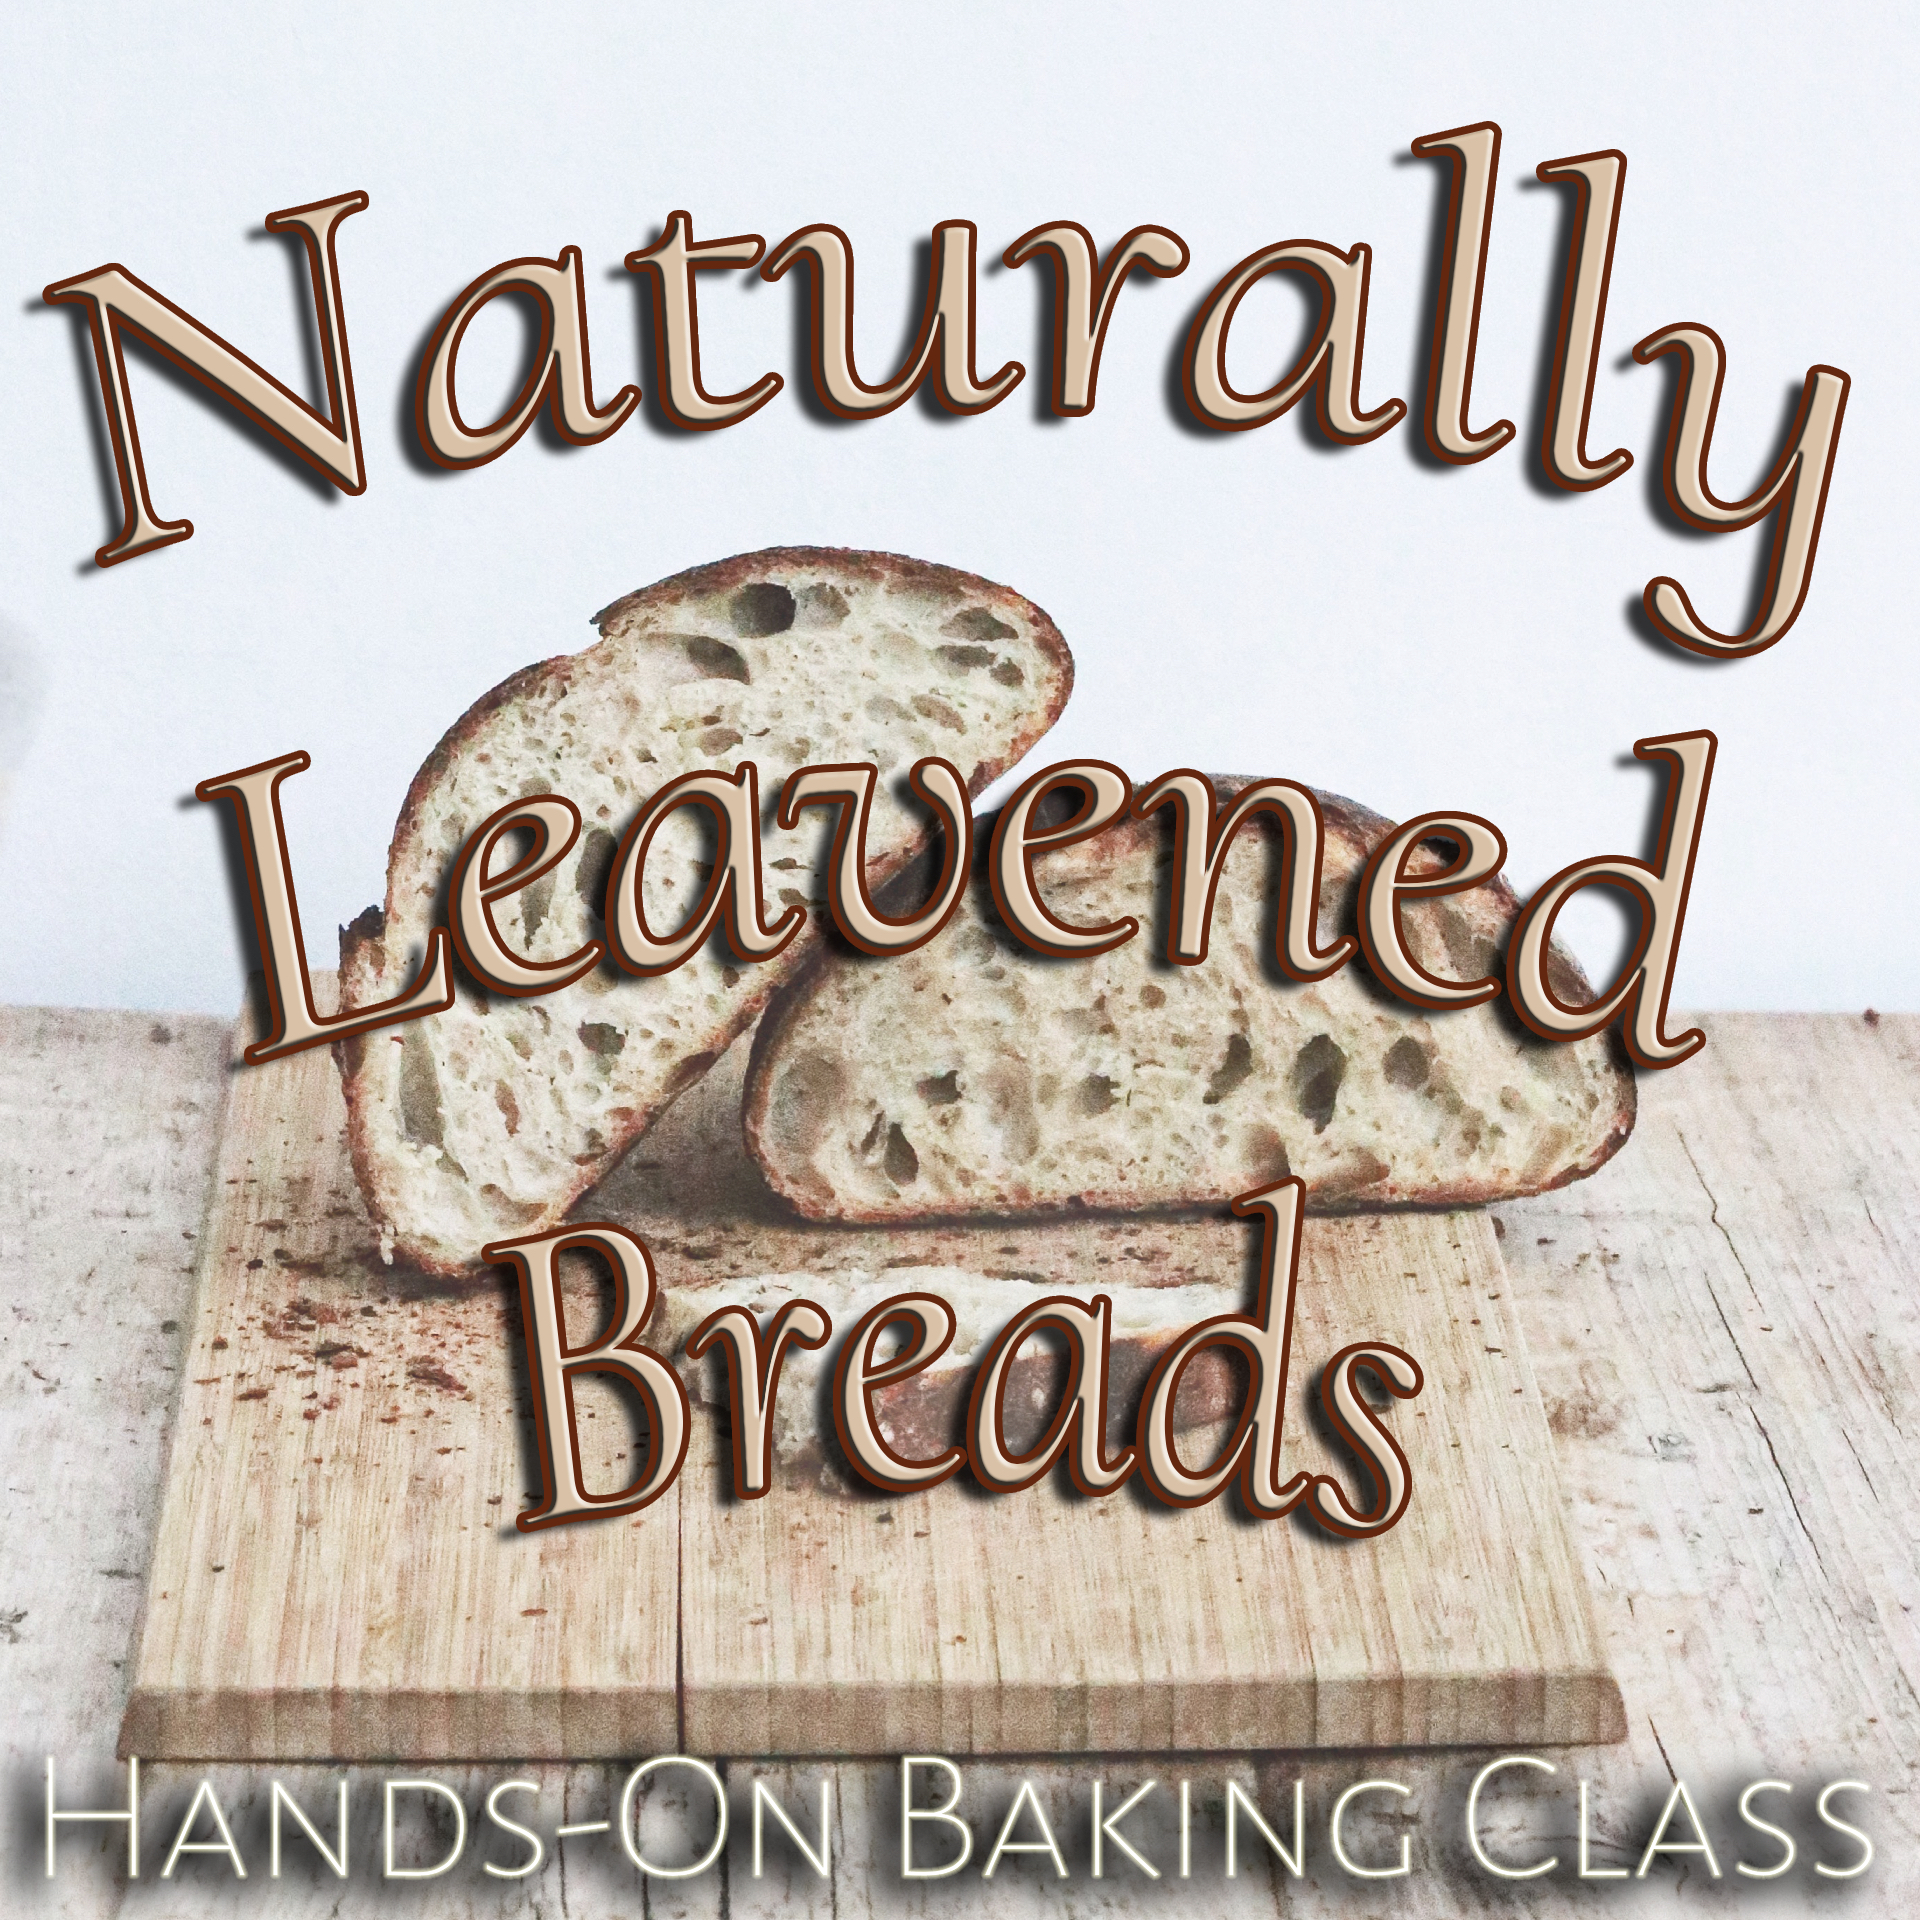 Naturally Leavened Breads